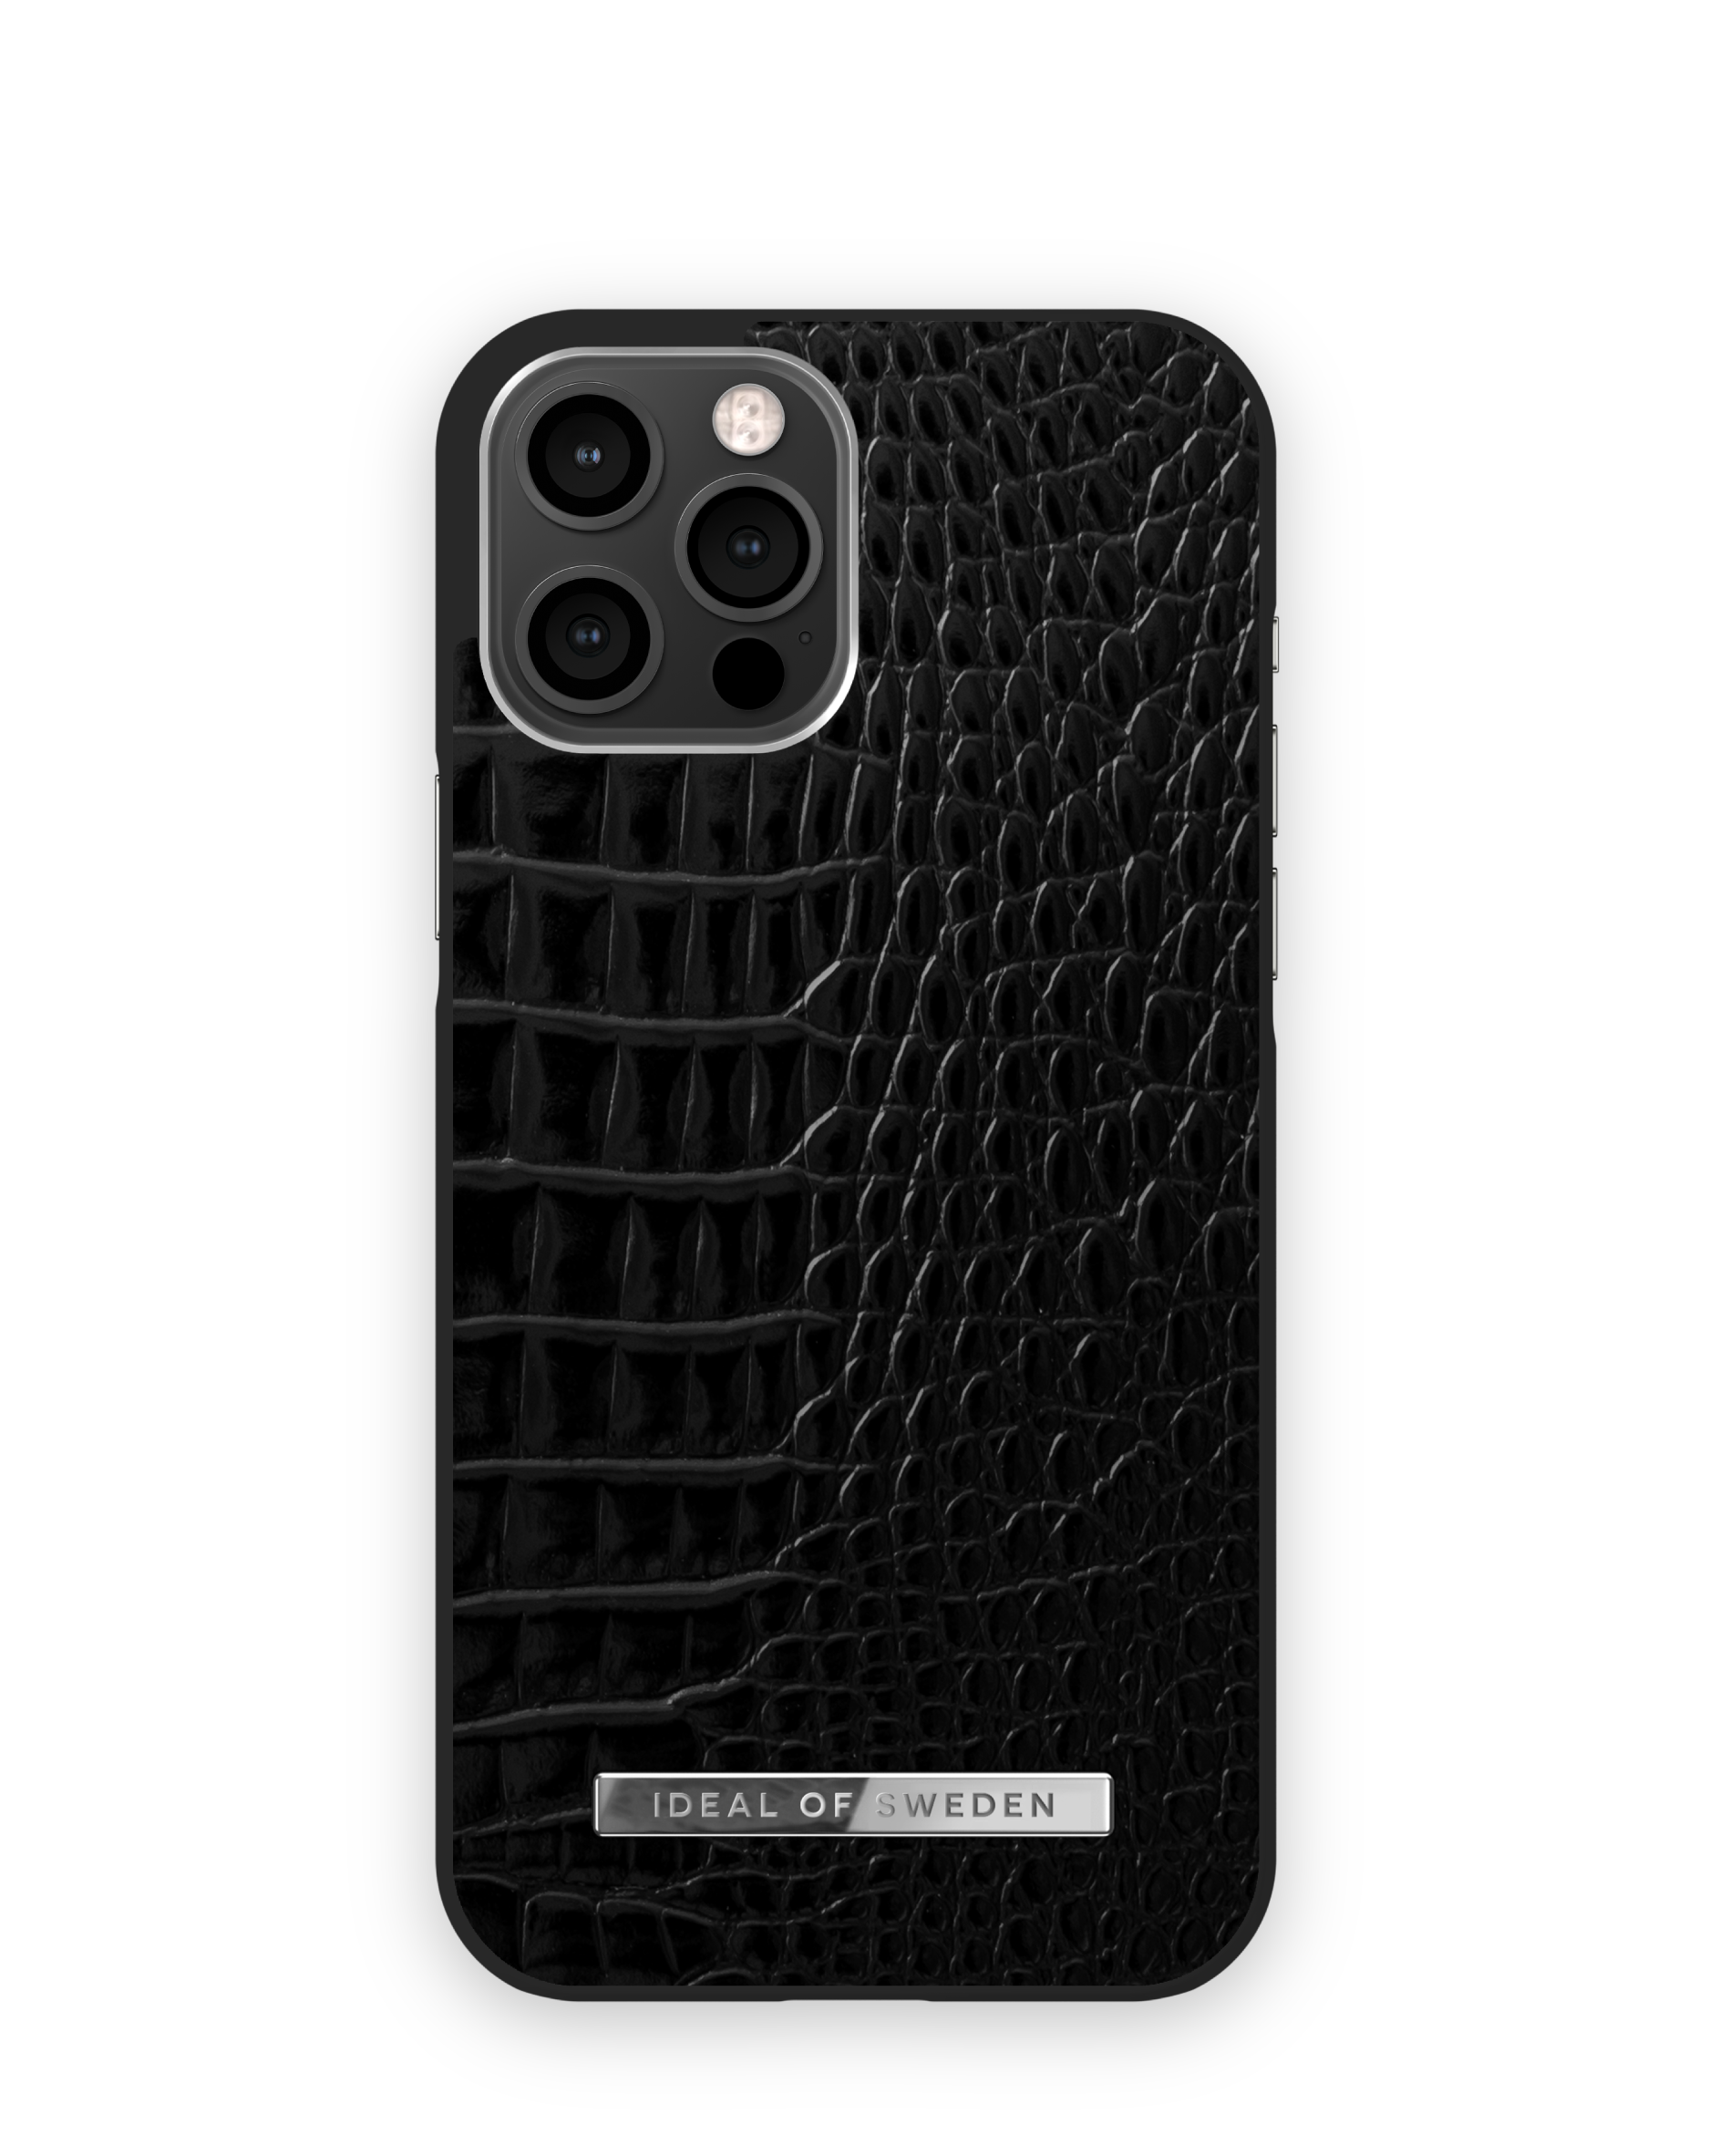 IPhone OF SWEDEN Noir IDEAL Neo Backcover, Pro Apple, IDACSS21-I2067, 12 Silver Max, Croco